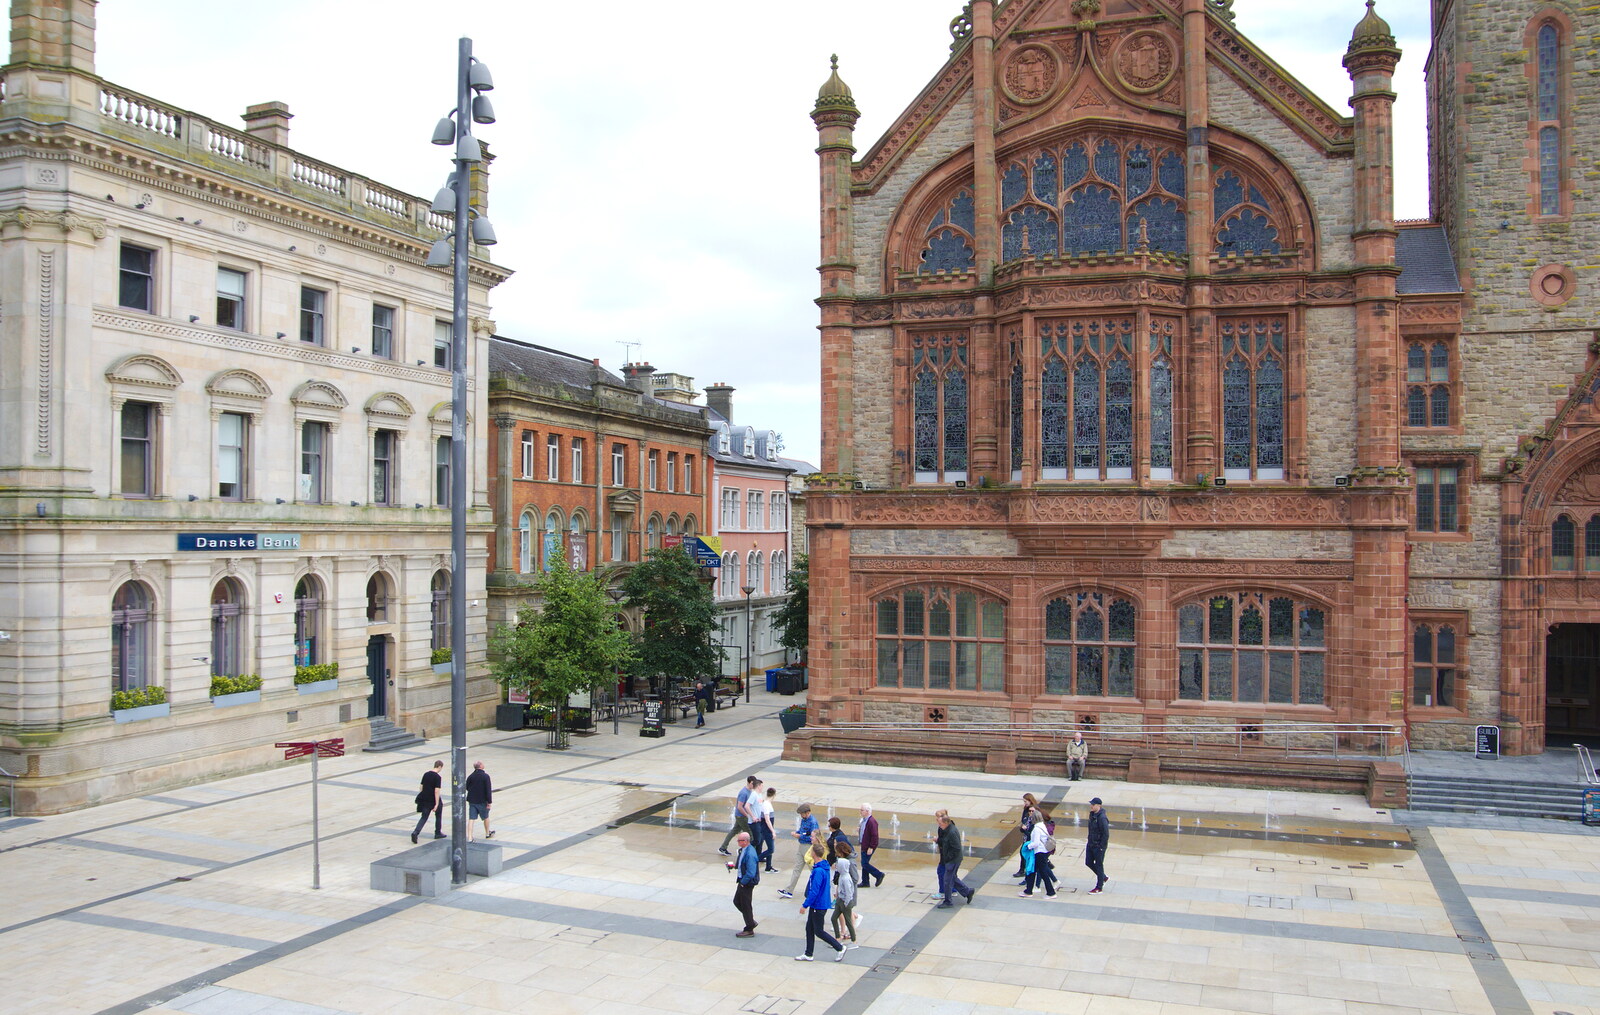 A square by the cathedral from A Day in Derry, County Londonderry, Northern Ireland - 15th August 2019